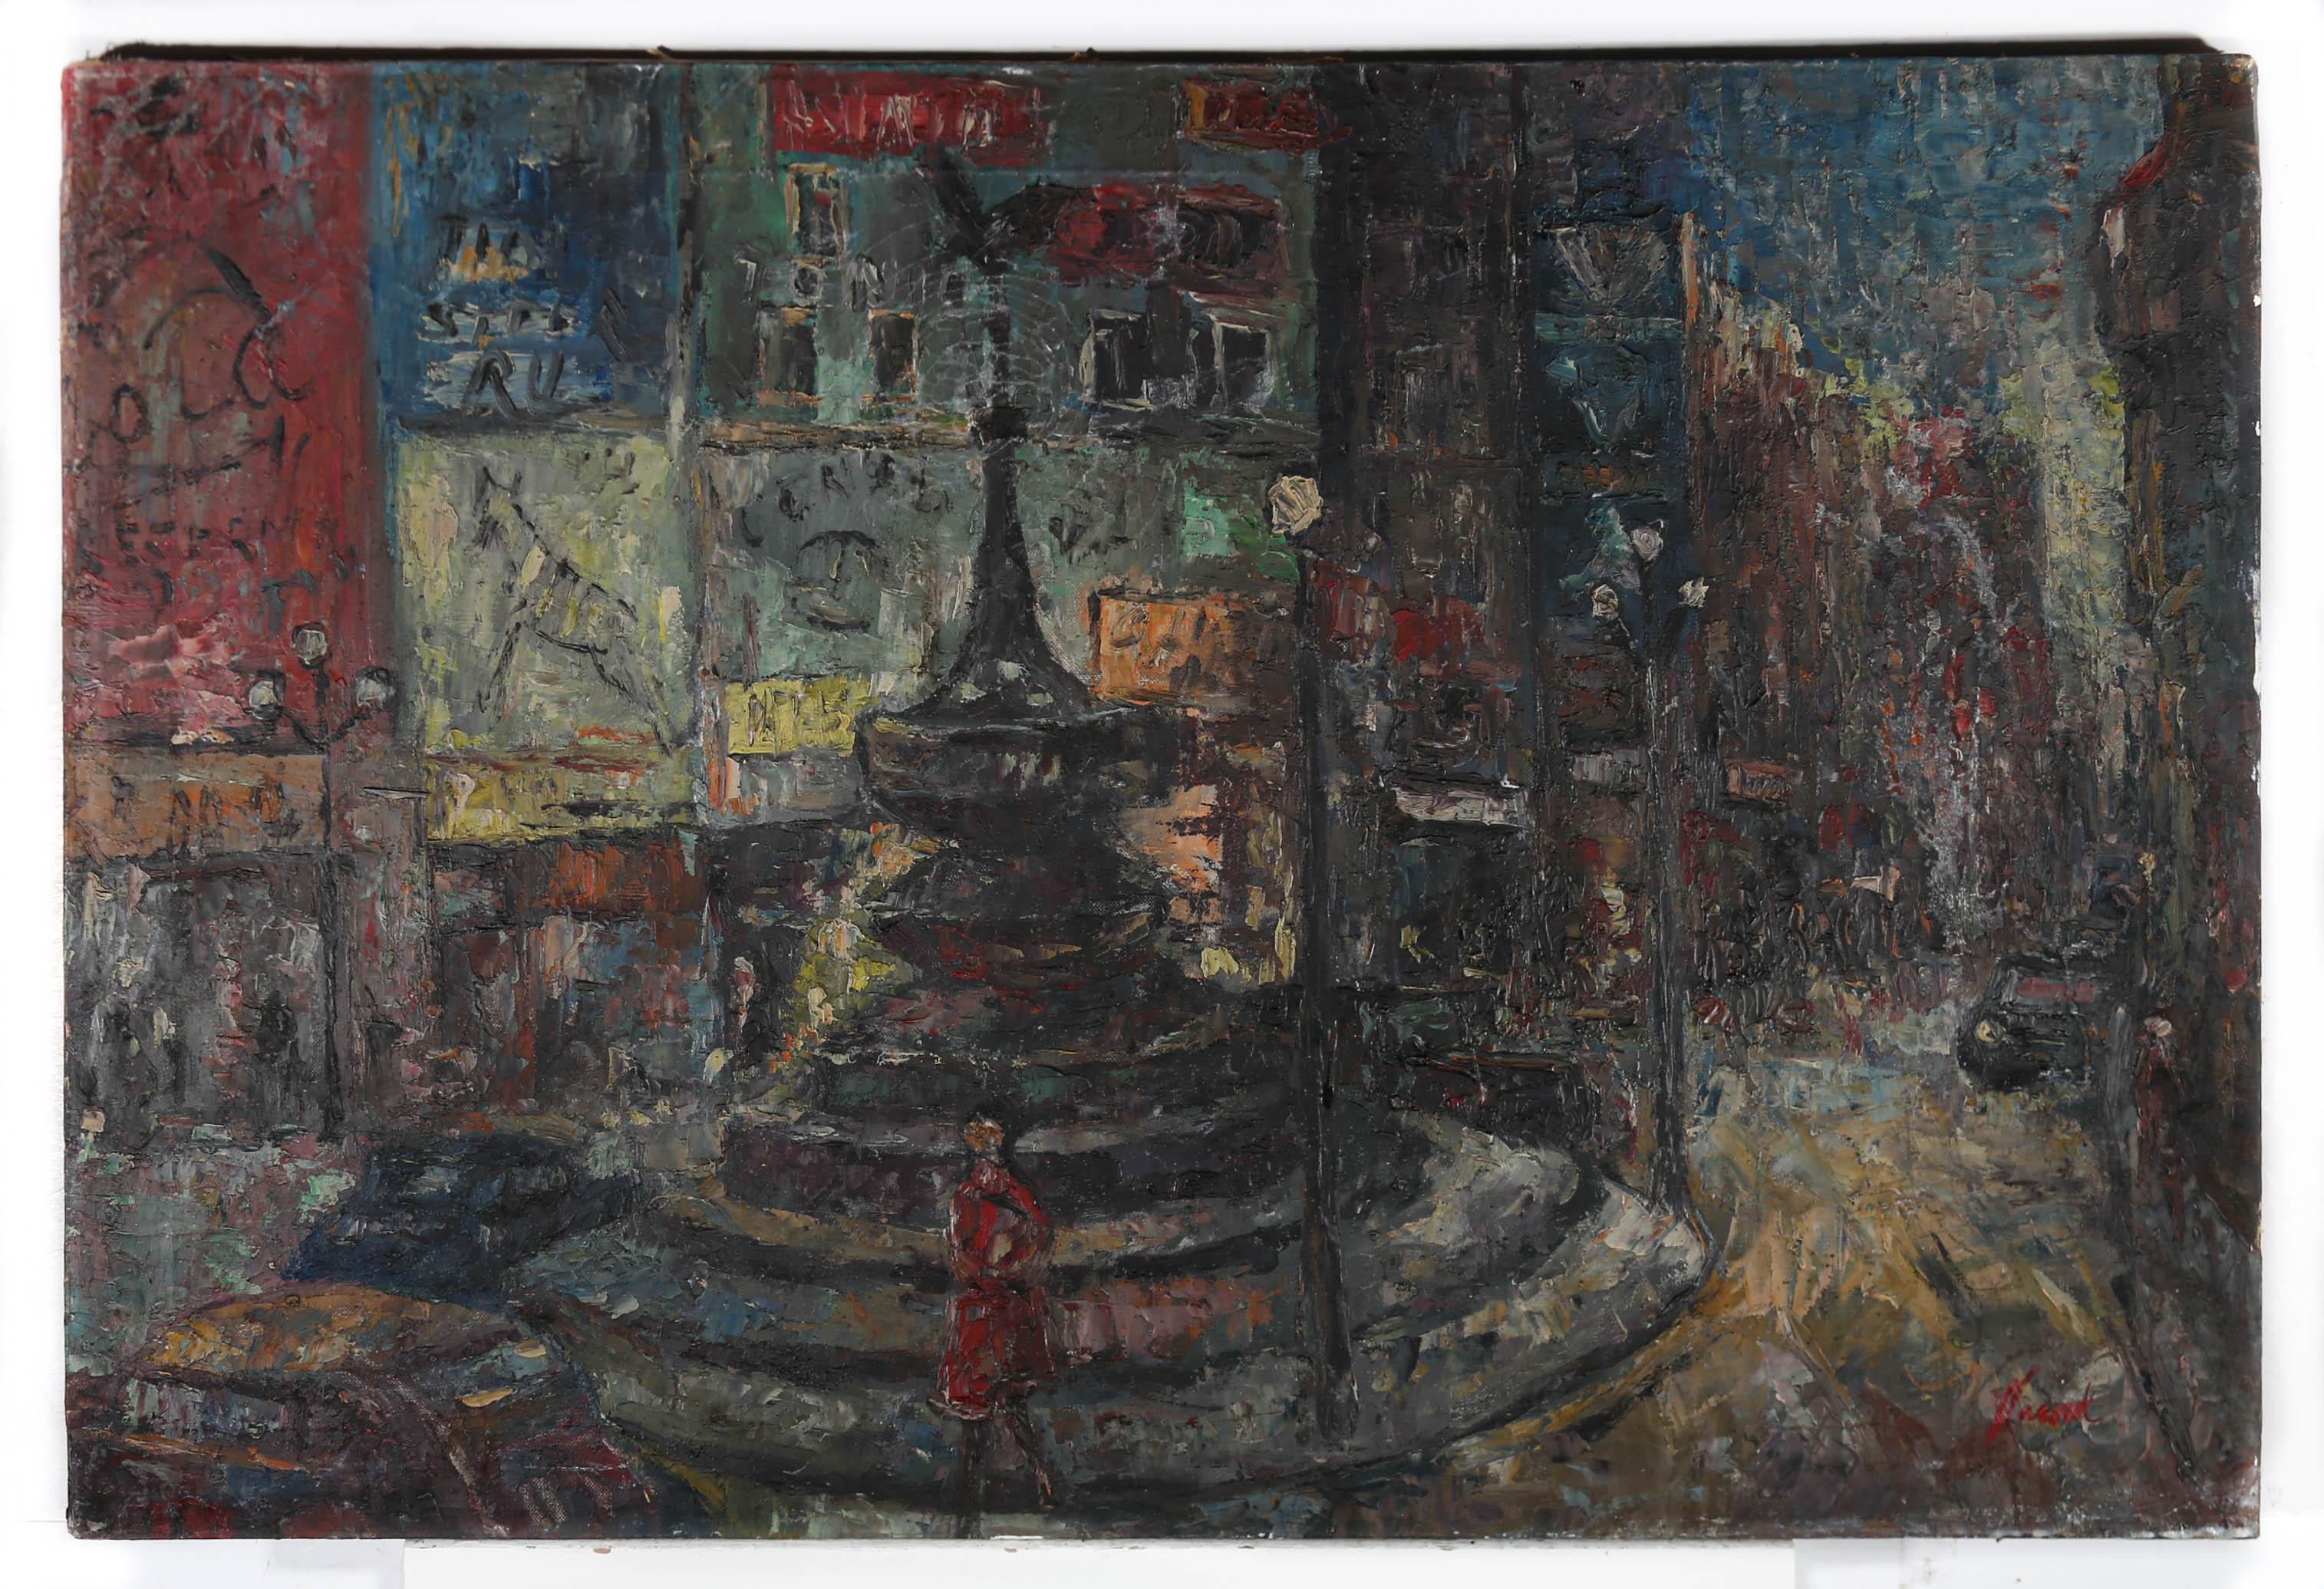 Heavy impasto takes you back to the hustle and bustle of London in this impressionistic view of Piccadilly Circus. To the foreground the statue of Eros can be seen, painted with palette knife detail against a colourful backdrop of city lights and